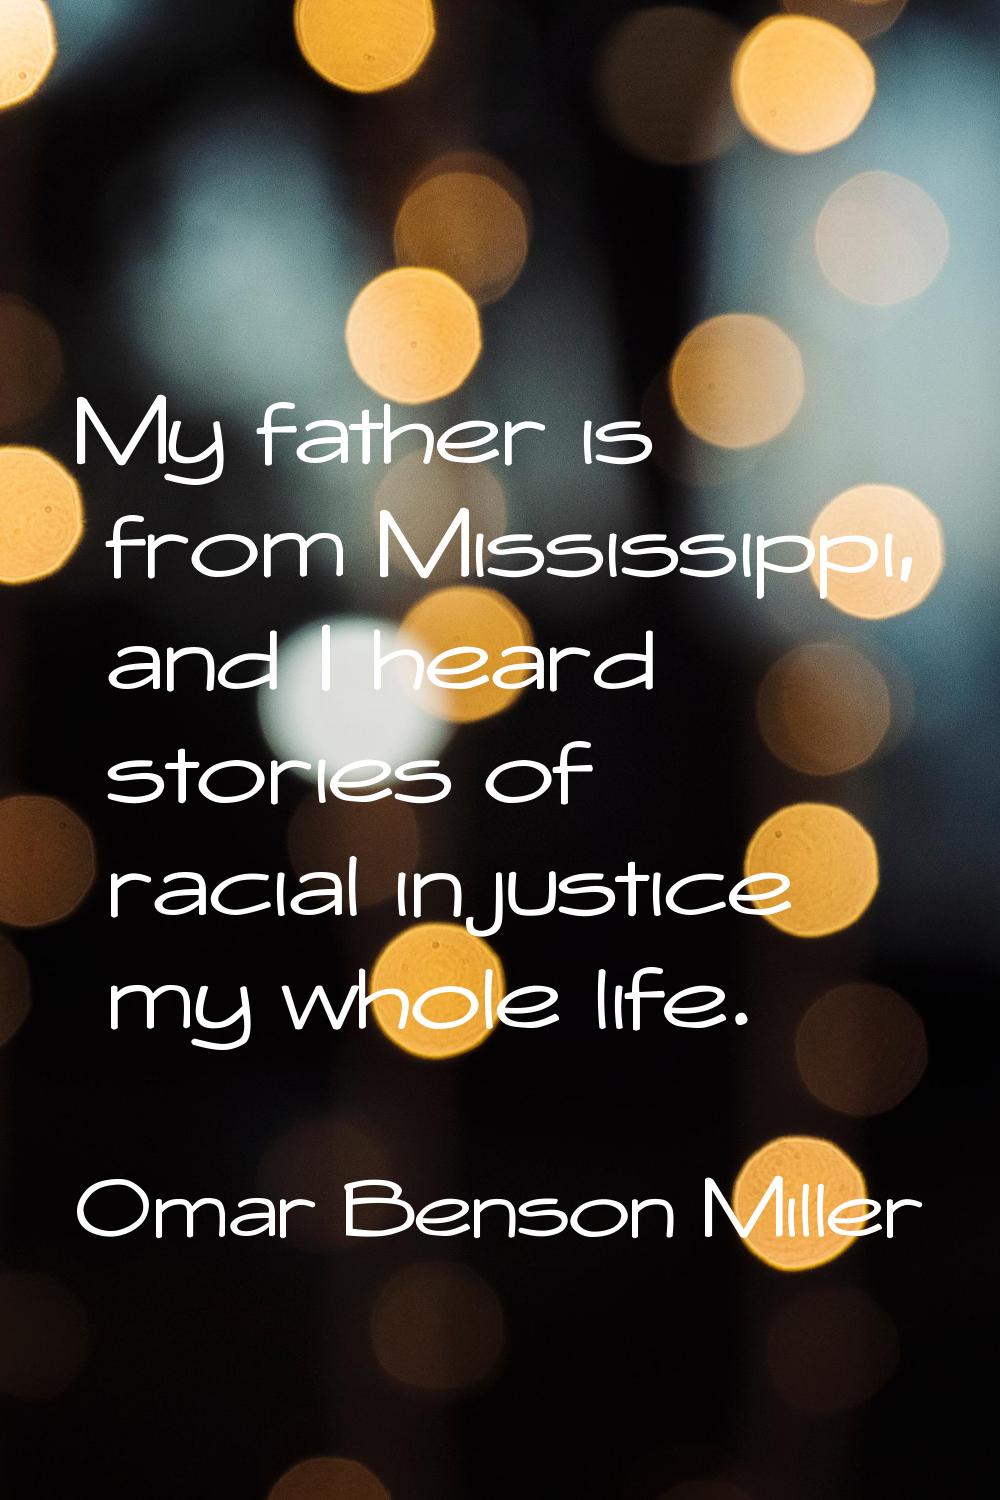 My father is from Mississippi, and I heard stories of racial injustice my whole life.